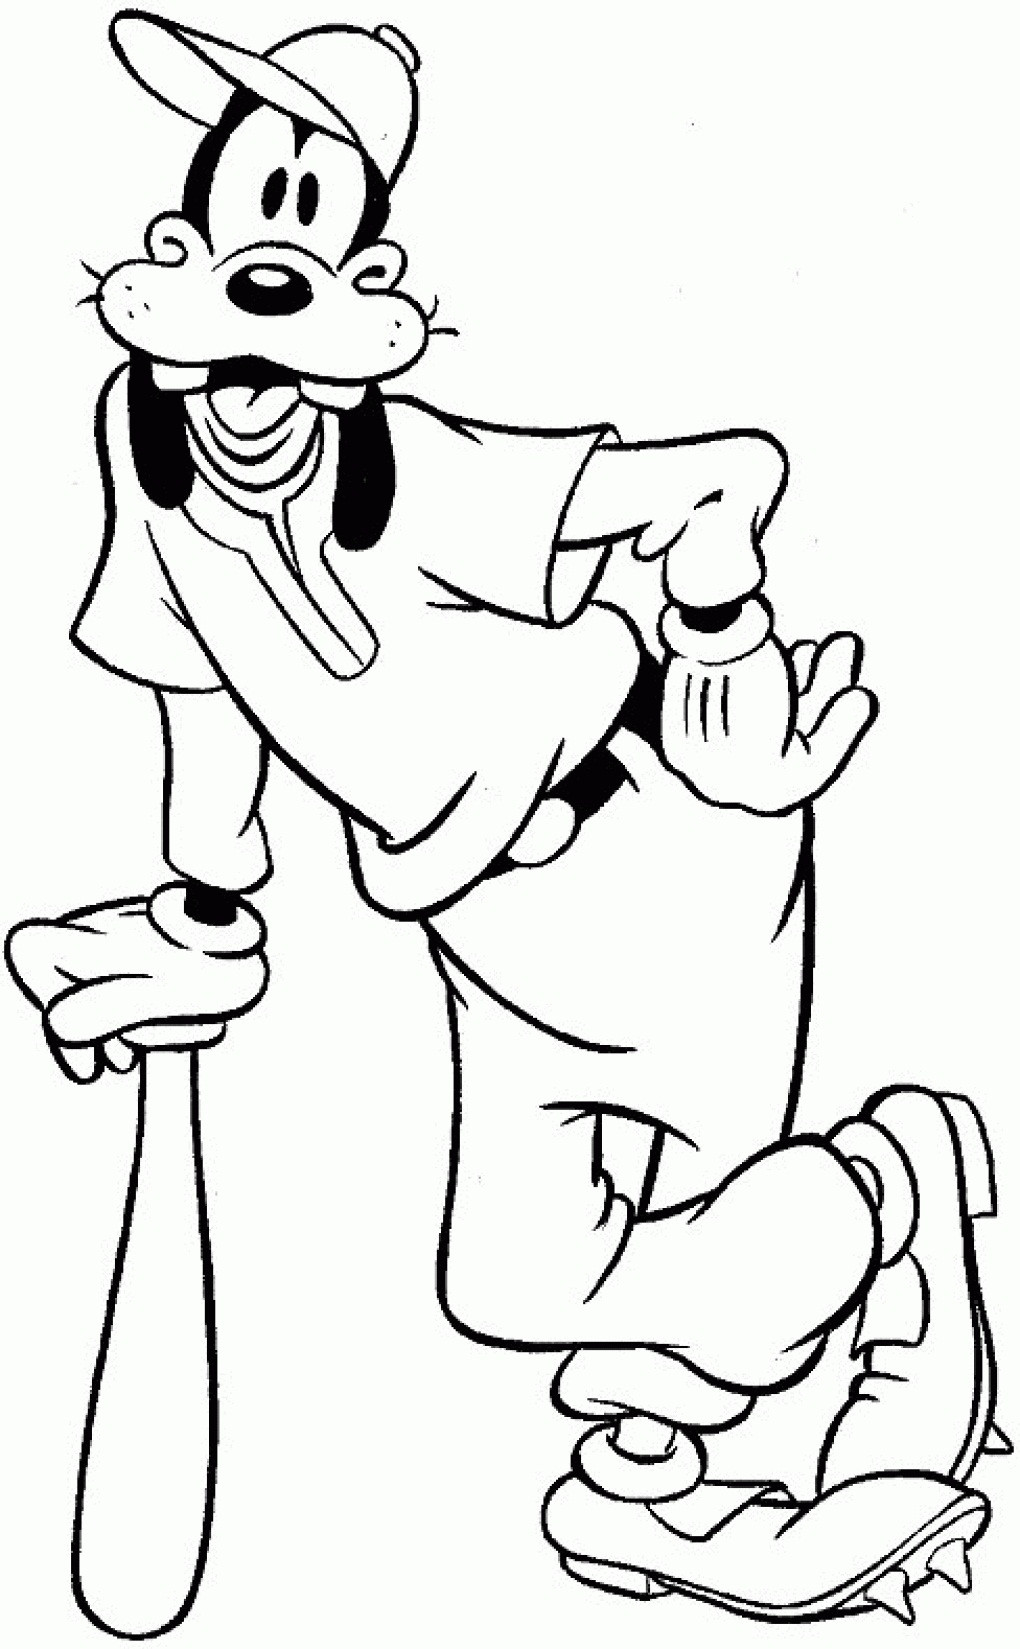 Disney Coloring Pages Free
 Free Printable Goofy Coloring Pages For Kids